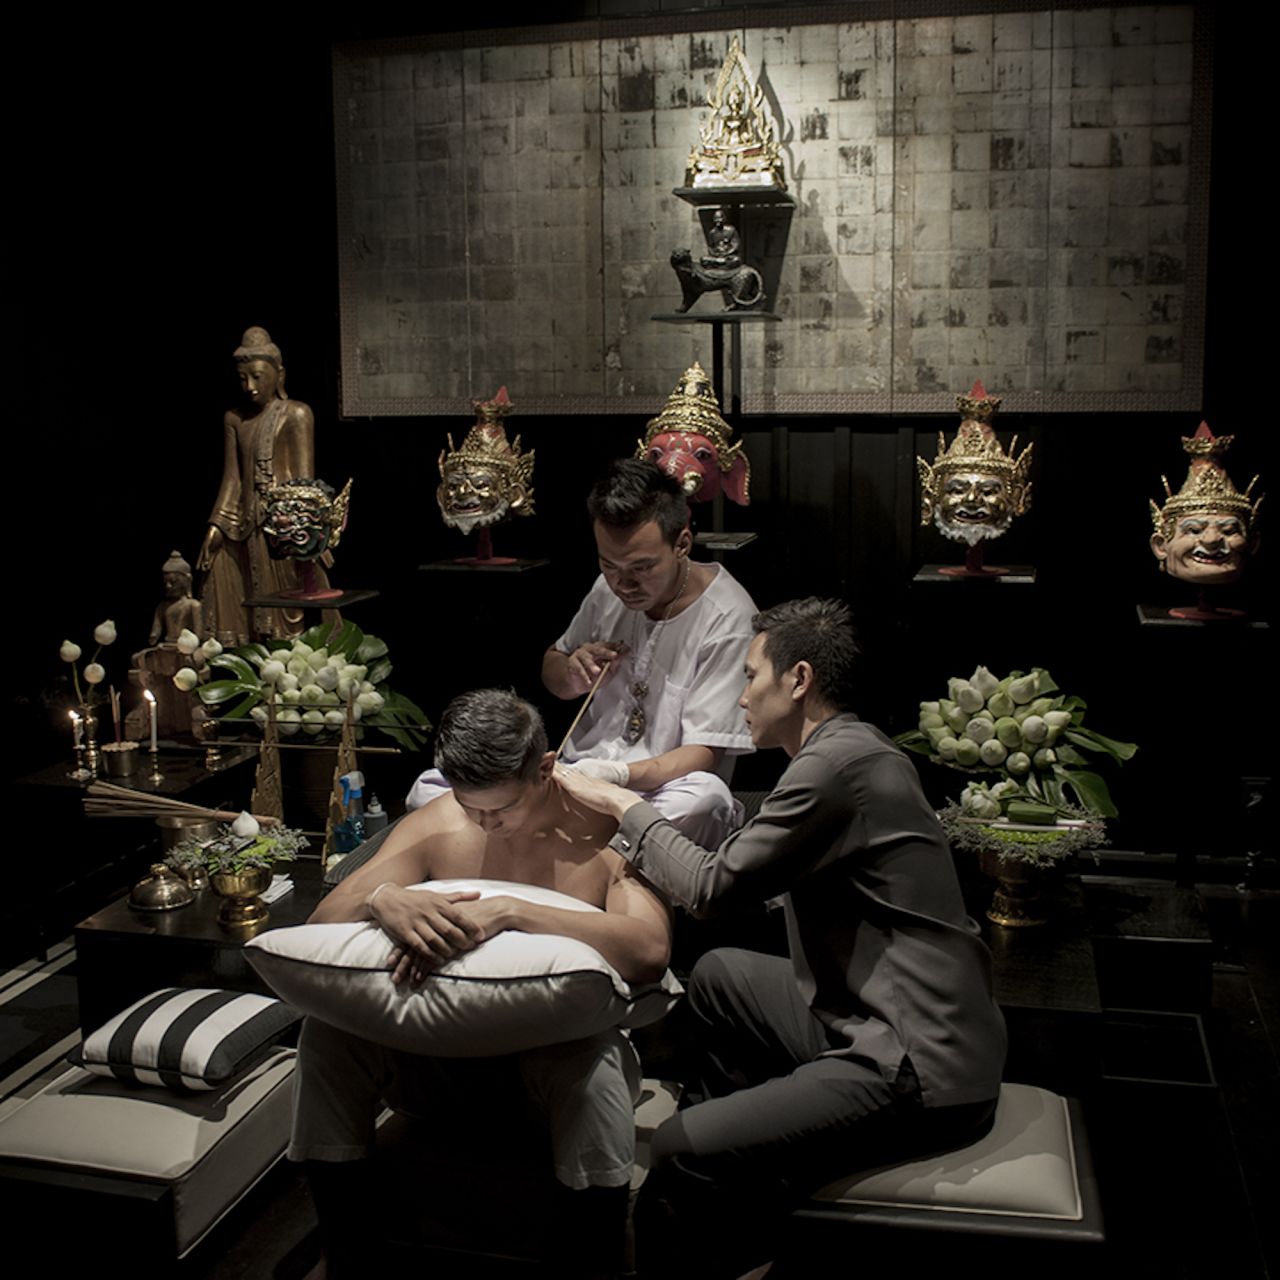 <strong>Sak yant tattoos:</strong> A new offering at The Siam, guests can get a sacred "sak yant" tattoo in the resort's specially consecrated space. All tattoos are applied by hand using a traditional khem sak rod and needle. 